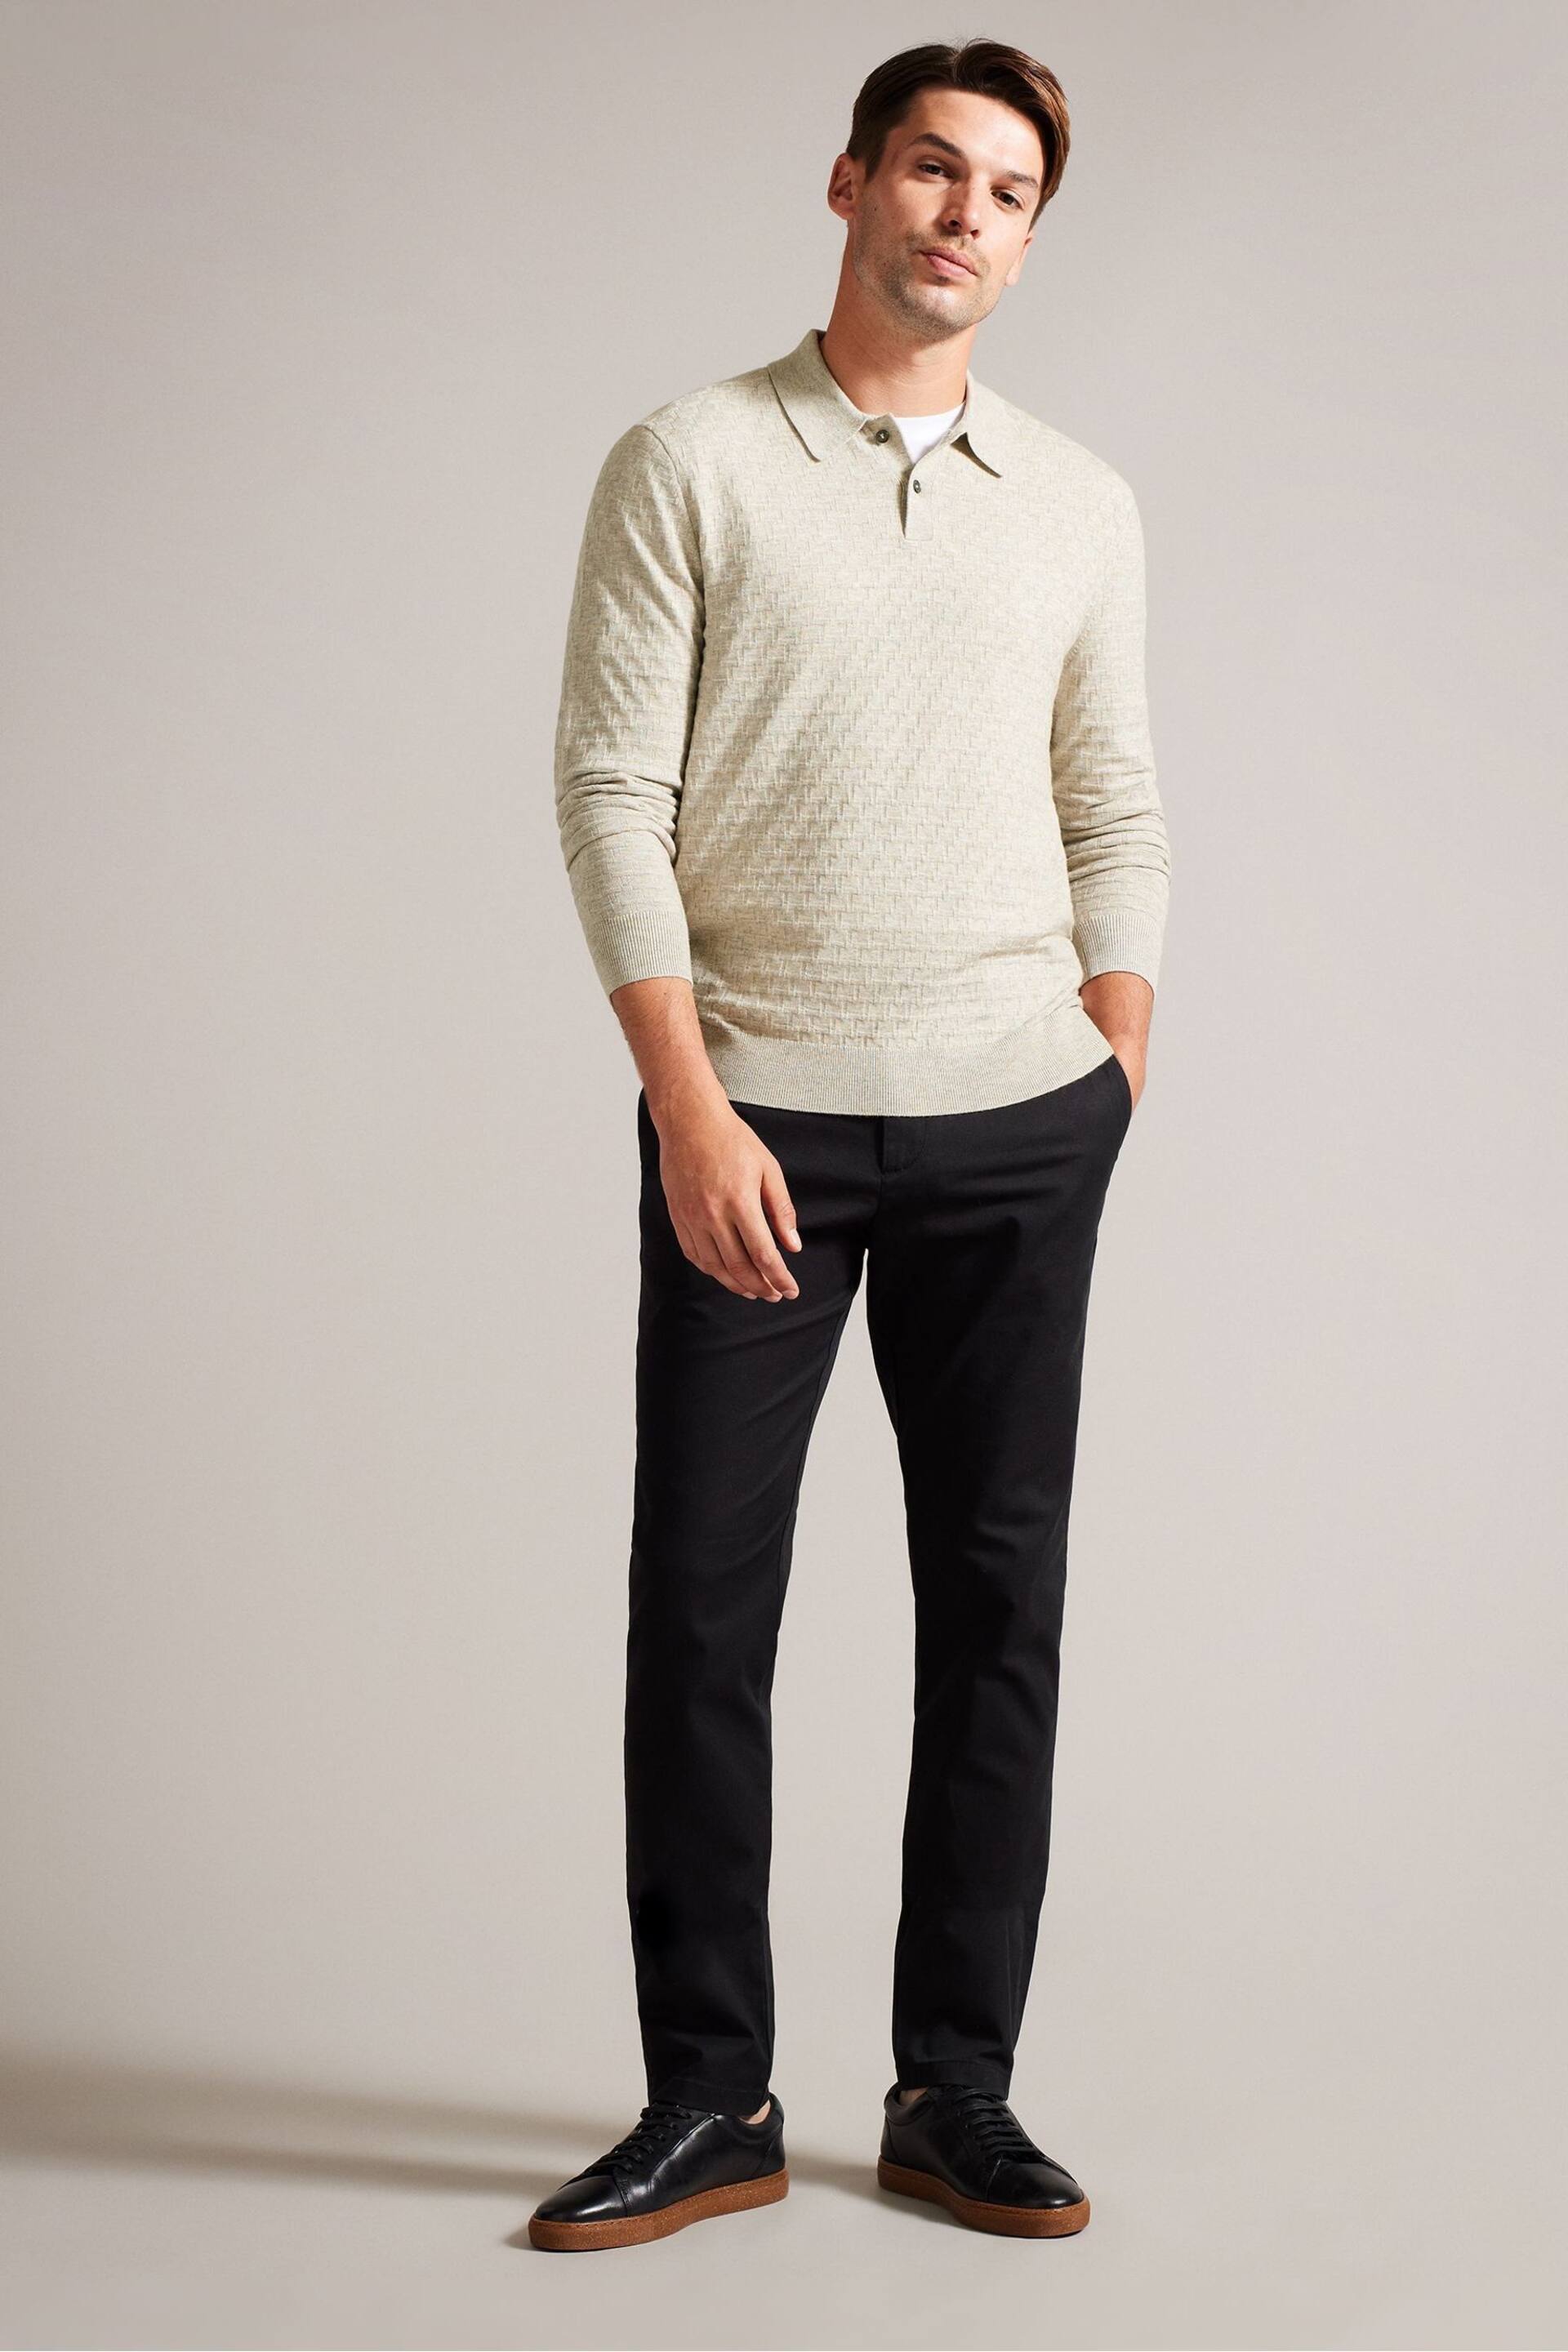 Ted Baker Natural Morar Stitch Knitted Polo Shirt - Image 3 of 6